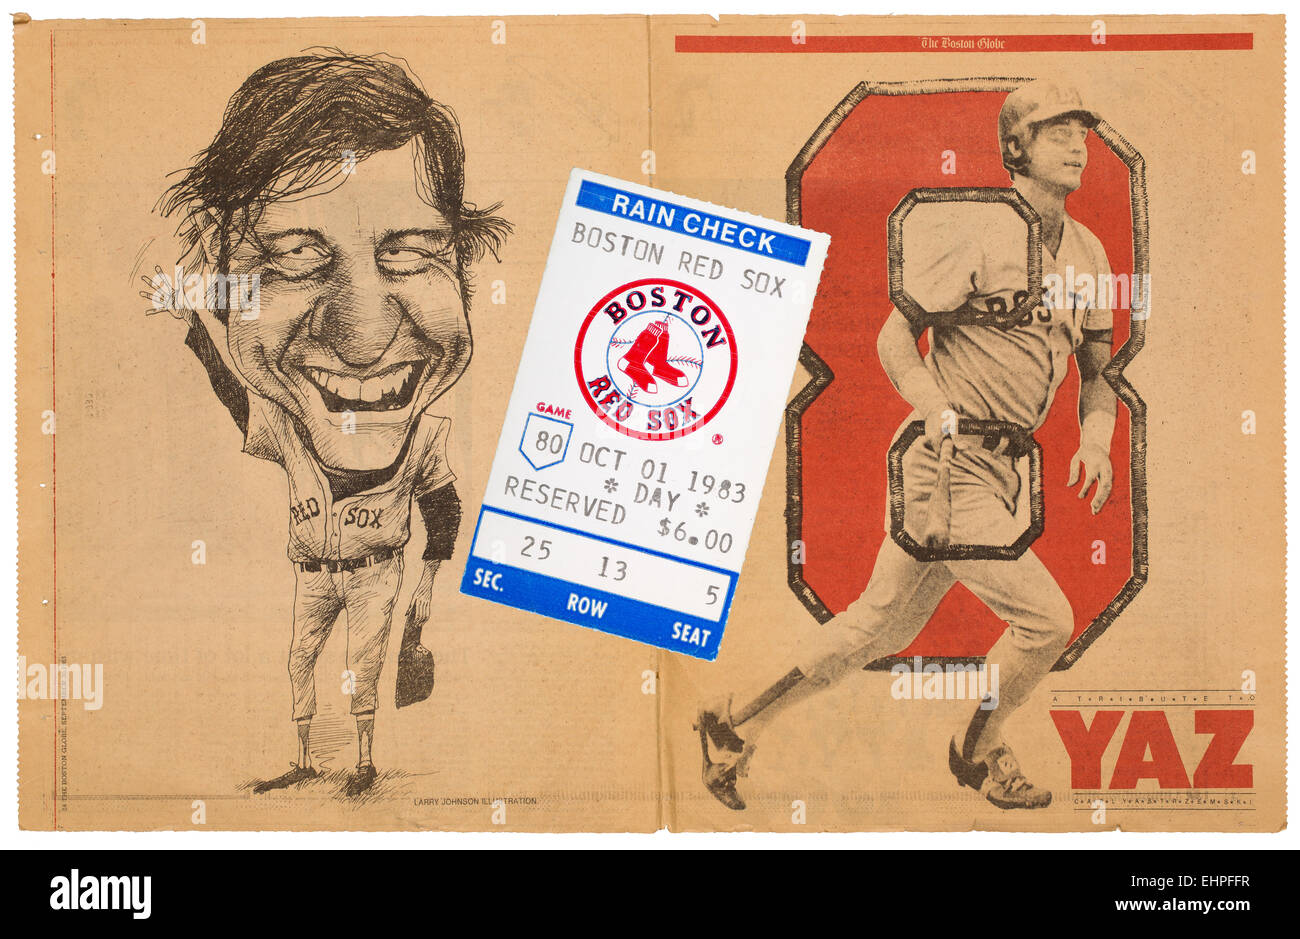 Boston Red Sox ticket stub and the Boston Globe September 30, 1983 special edition about Boston Red Sox player Carl Yastrzemski Stock Photo